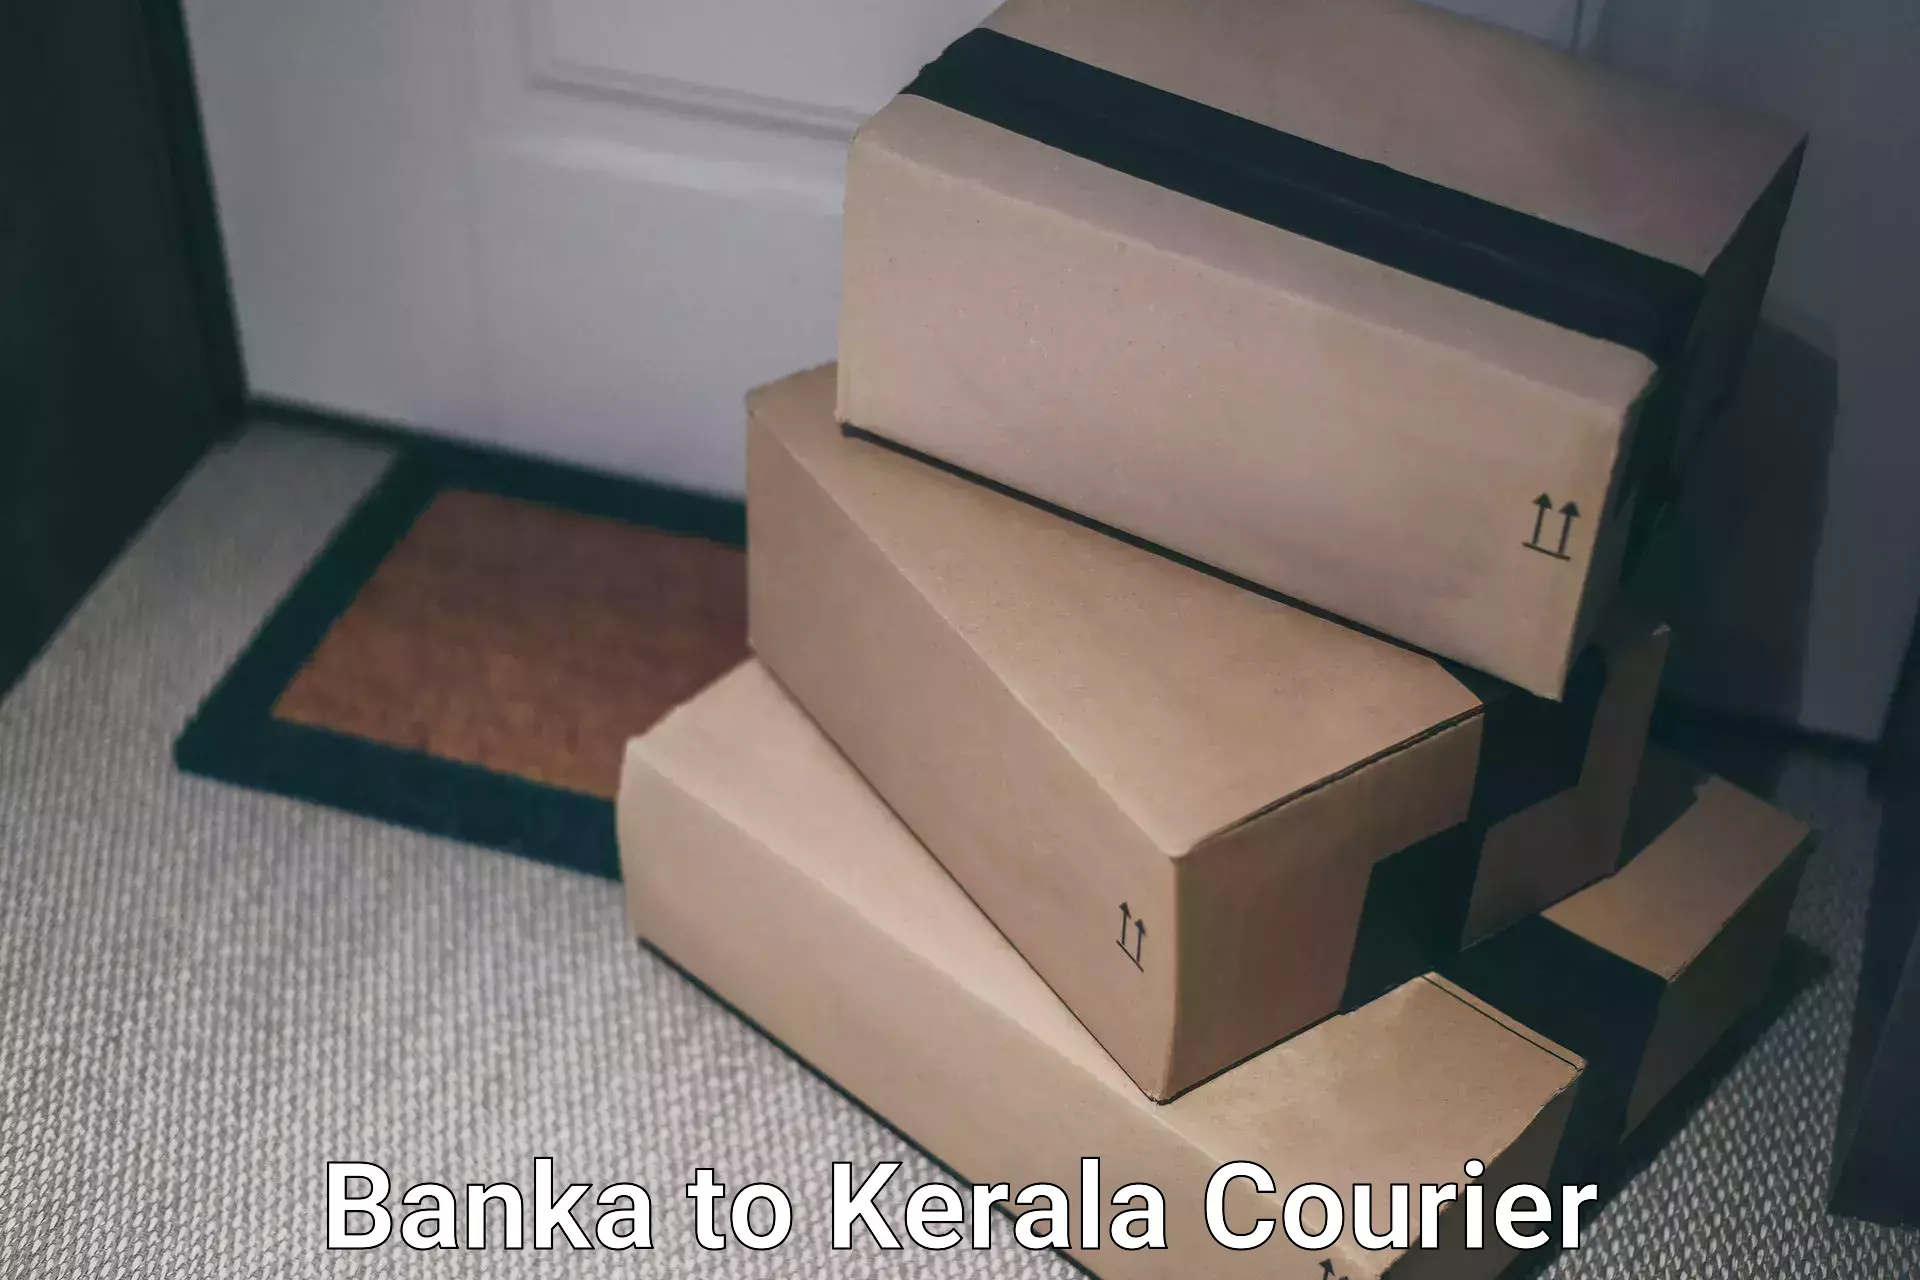 Overnight delivery services Banka to Kerala